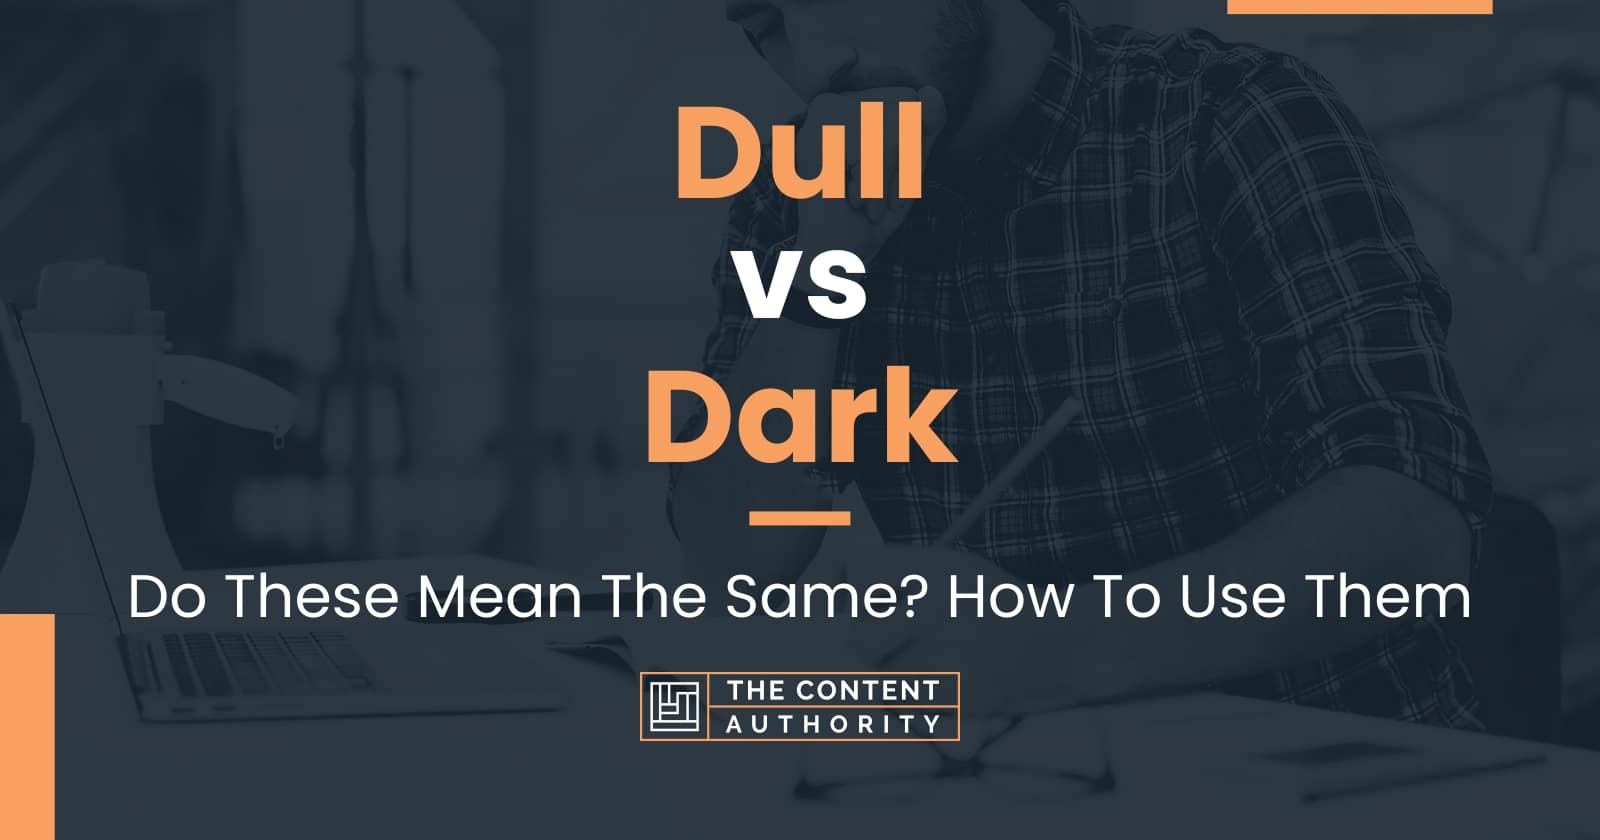 Dull vs Dark: Do These Mean The Same? How To Use Them